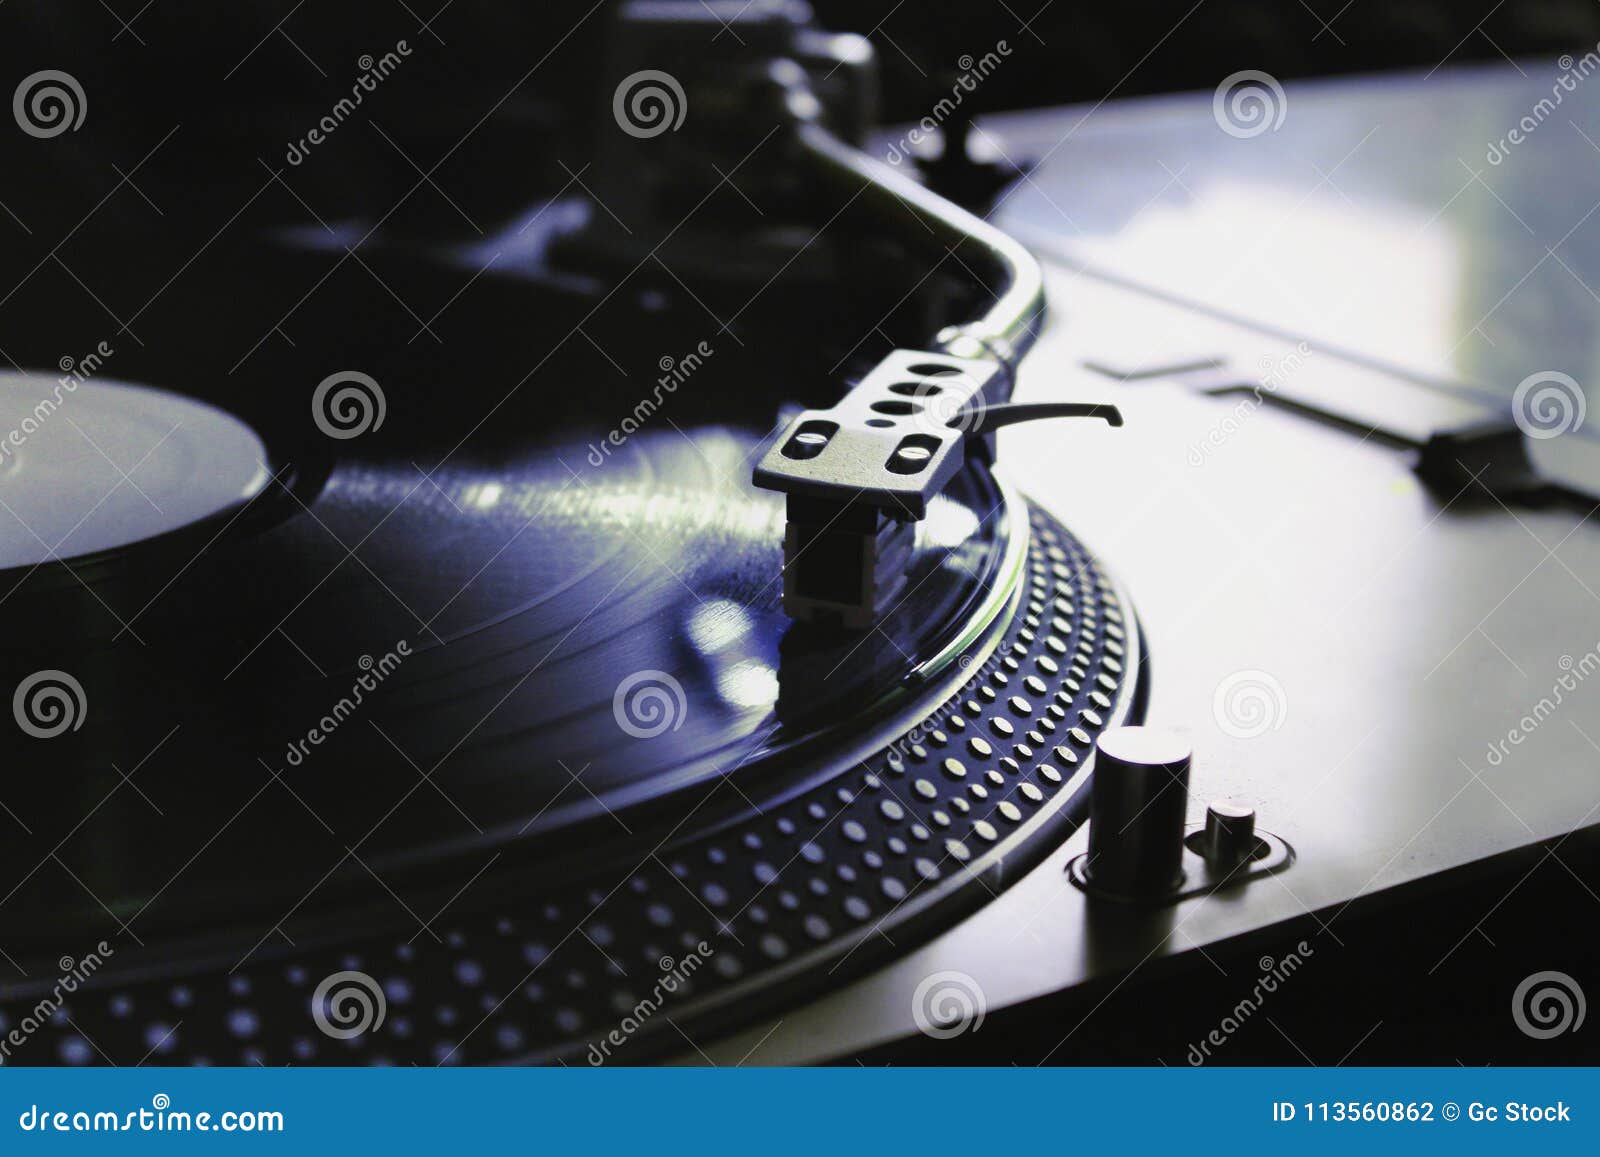 macro of a professional dj record player. concept: music, dj, hobby, passion